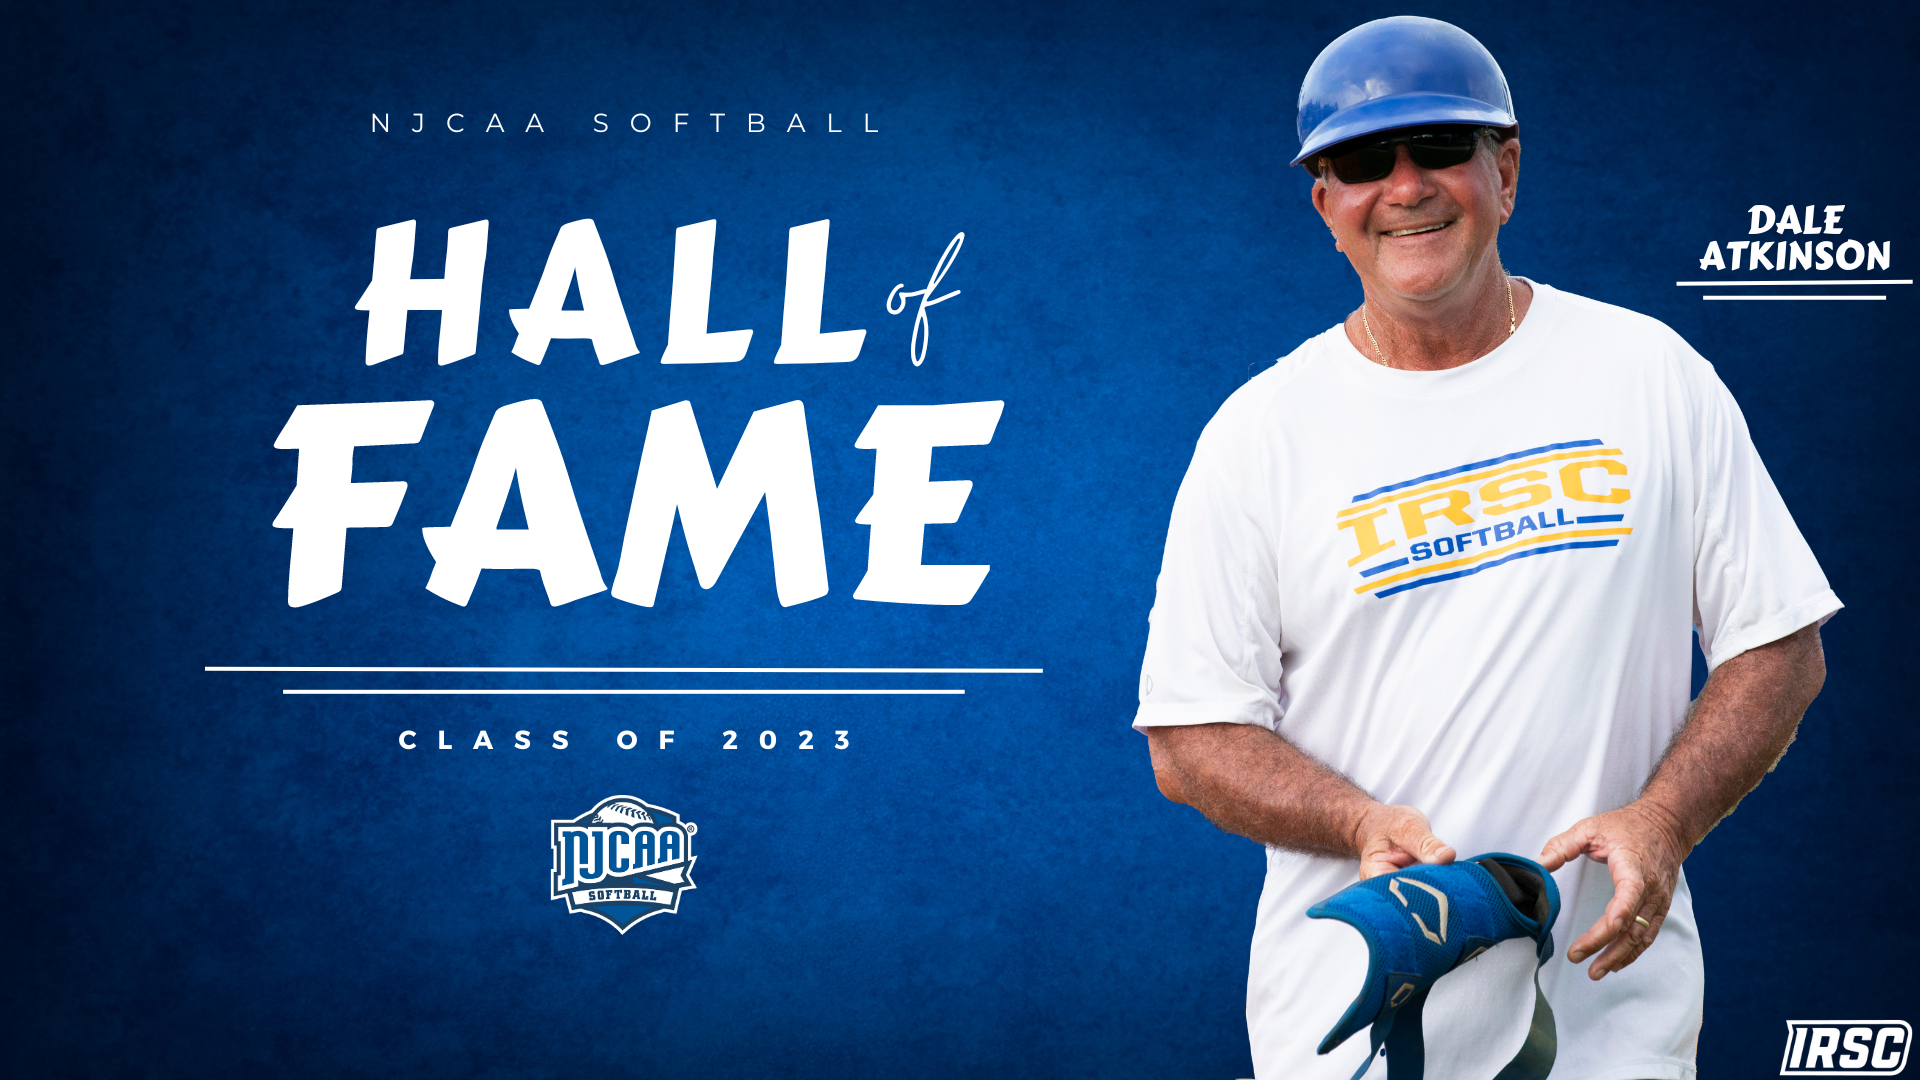 Atkinson inducted into NJCAA Softball Coaches’ Hall of Fame